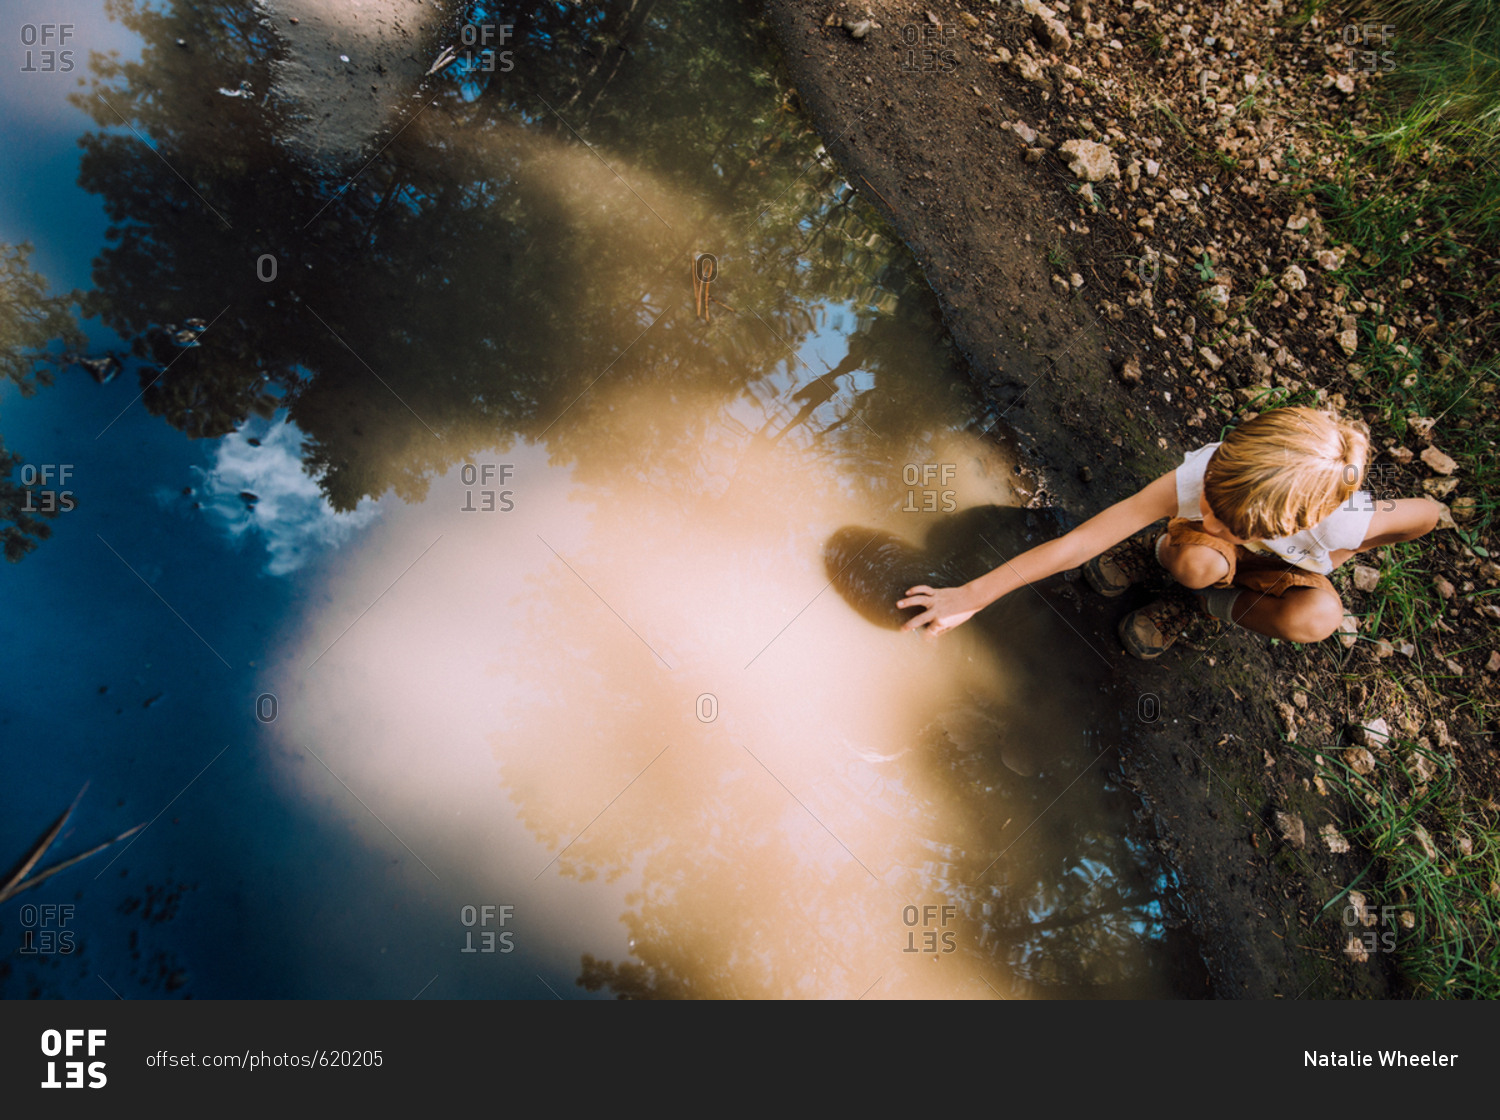 Boy reaching into mud puddle on dirt path